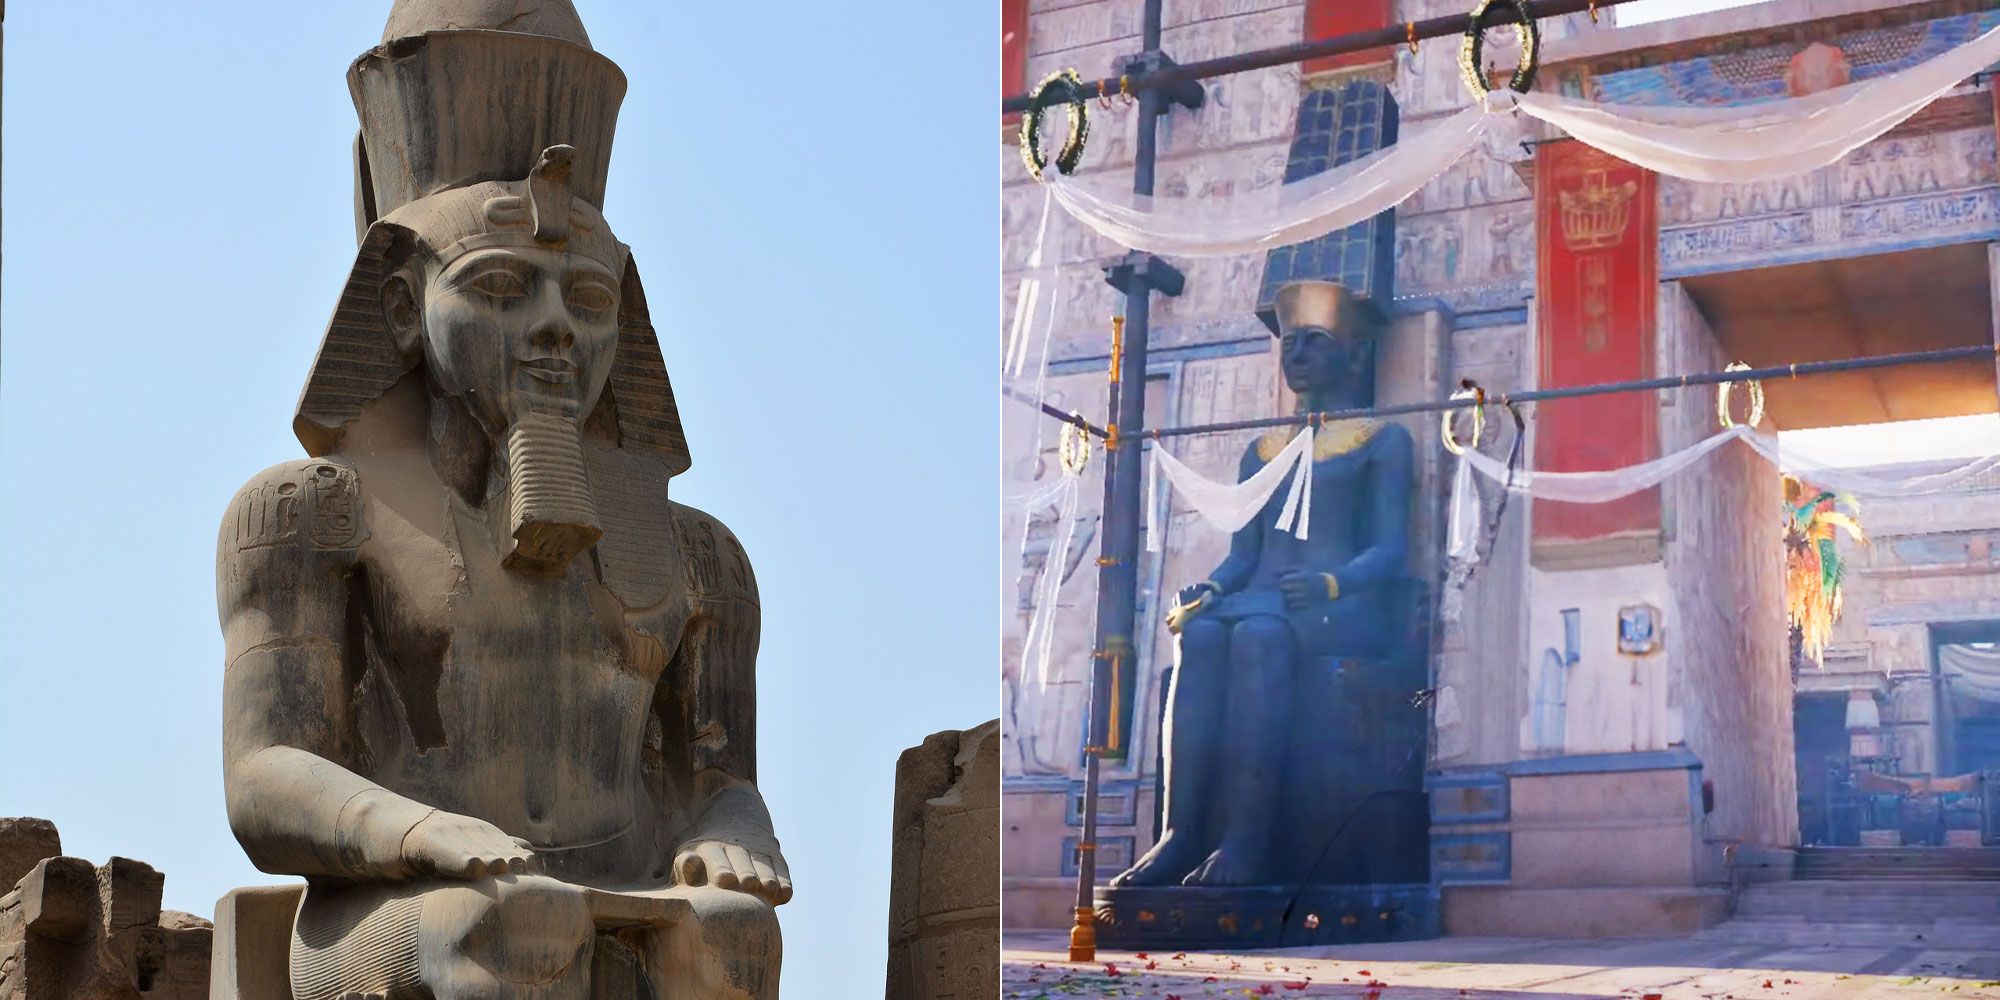 Temple of Karnak in Egypt Assassin's Creed vs real photo. 